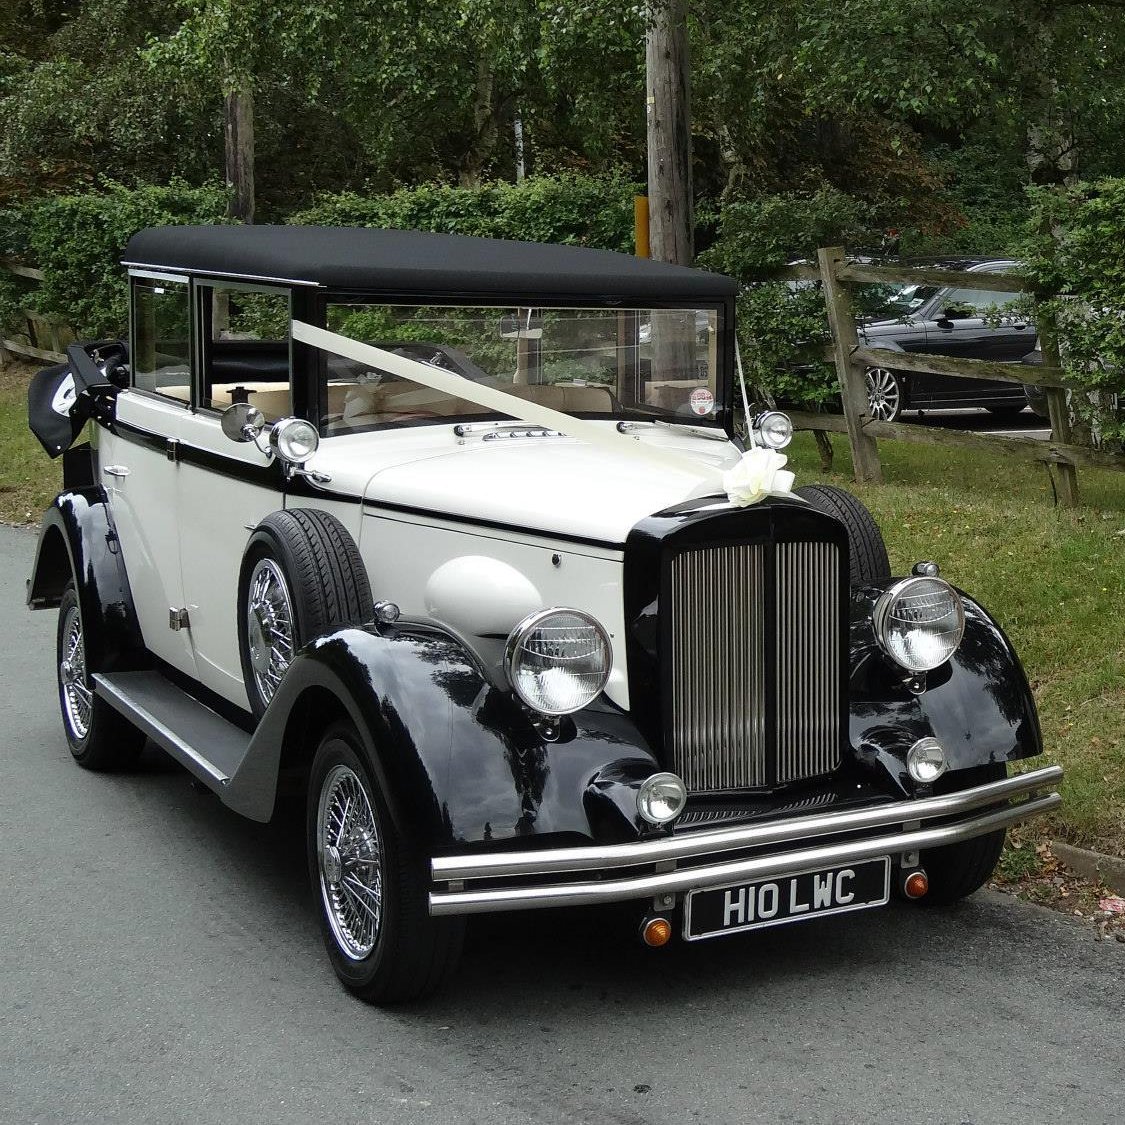 Today we've the #wedding of Rachael & Michael who are using one of our Regent Landaulets in black & ivory. Their wedding is taking place at St Marks Church #GreatWyrley & @TheGeorgeHotel #Lichfield. We thank them for choosing Love Wedding Cars! #weddingcars #gettingmarriedtoday